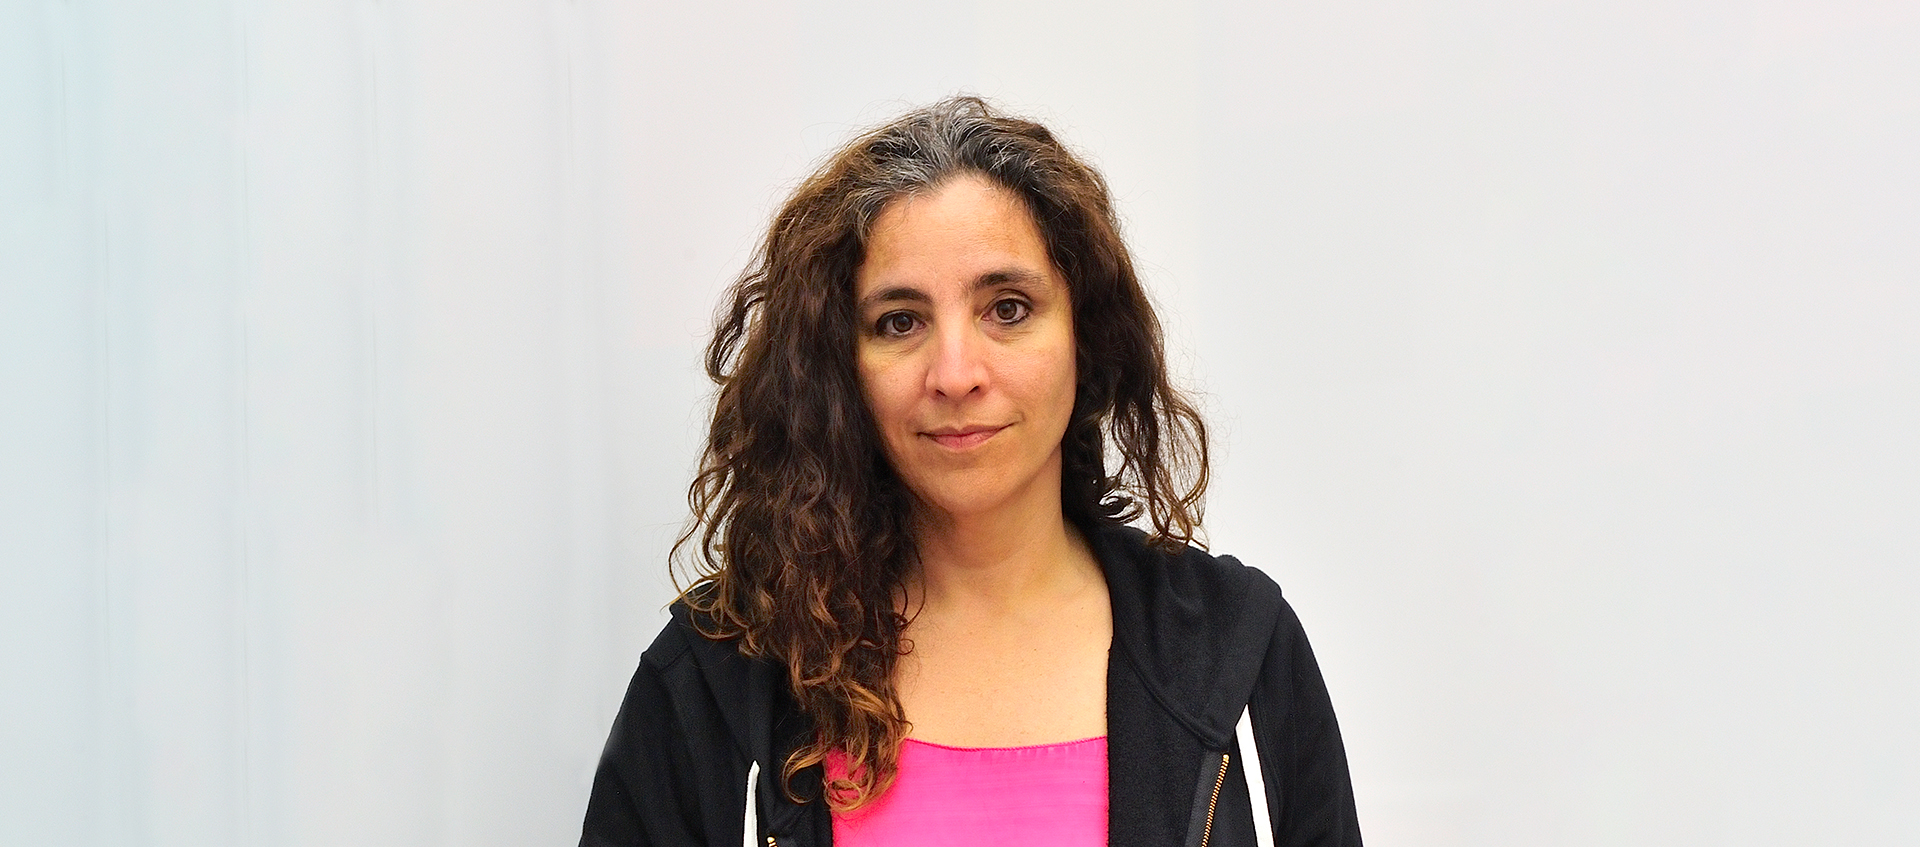 A photograph of Beatriz Santiago Muñoz who has long brown hair, wears a black zip hoodie with a pink shirt, against a white background.